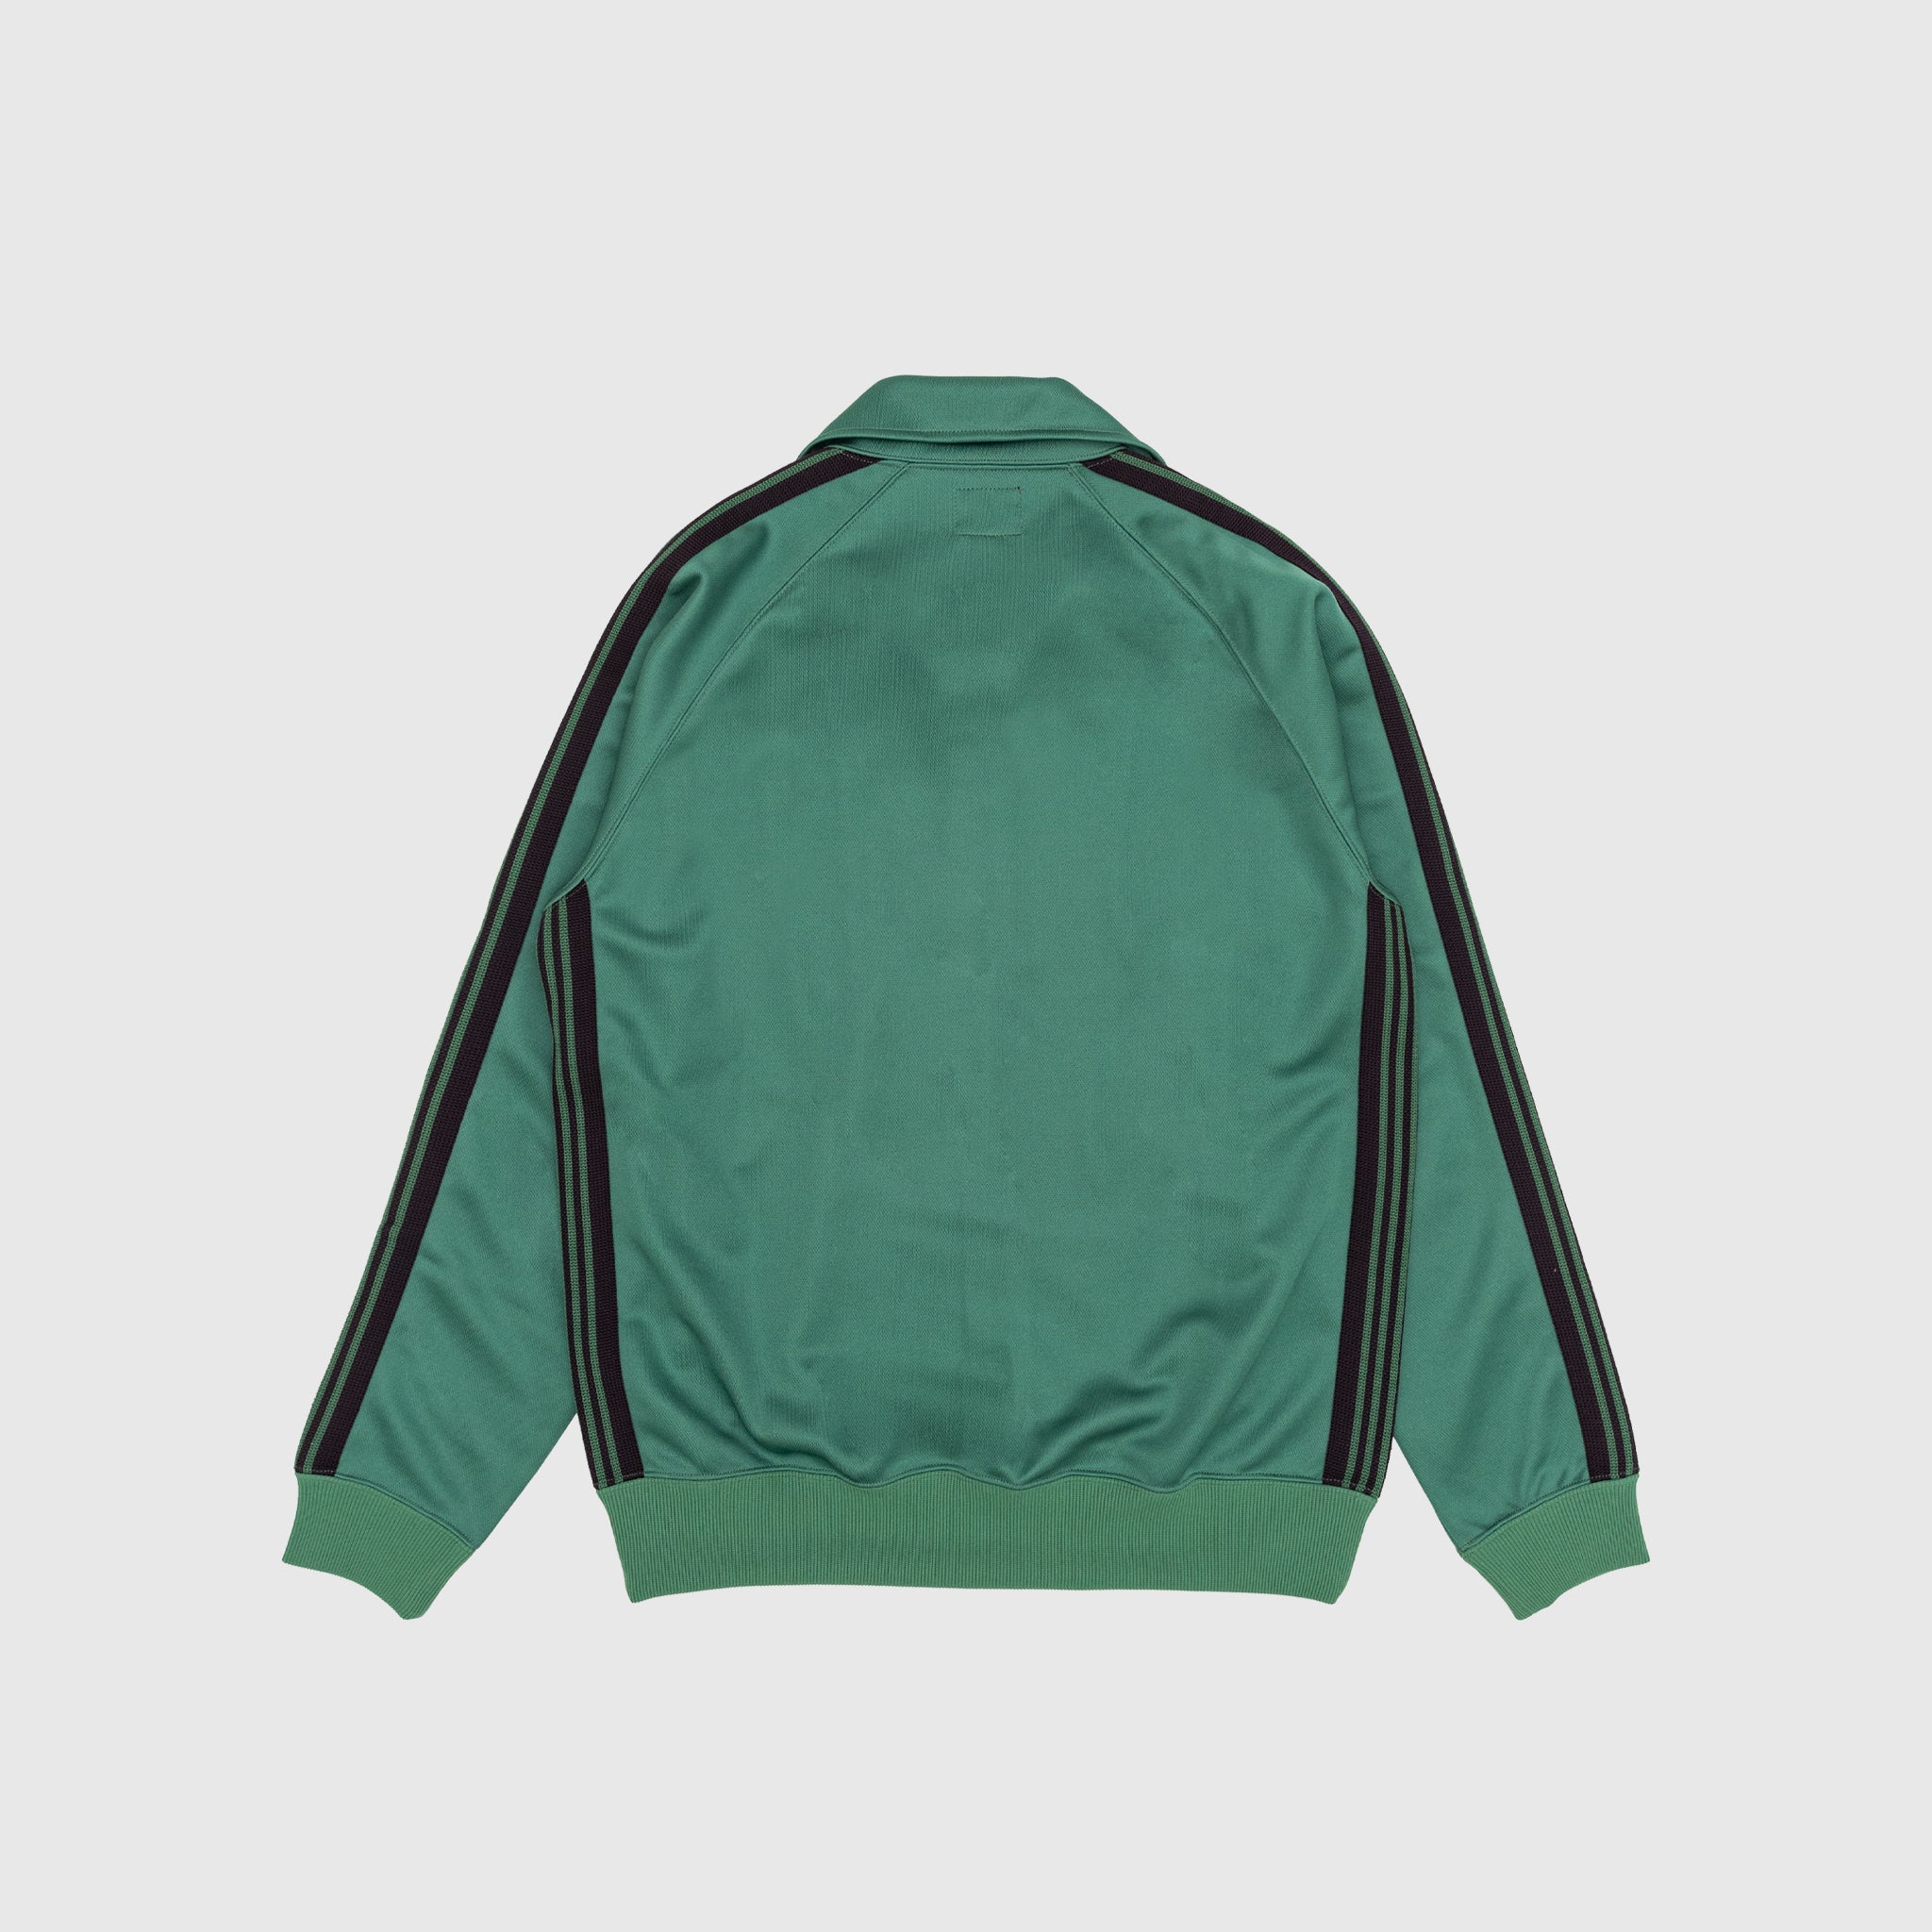 POLY SMOOTH TRACK JACKET – PACKER SHOES